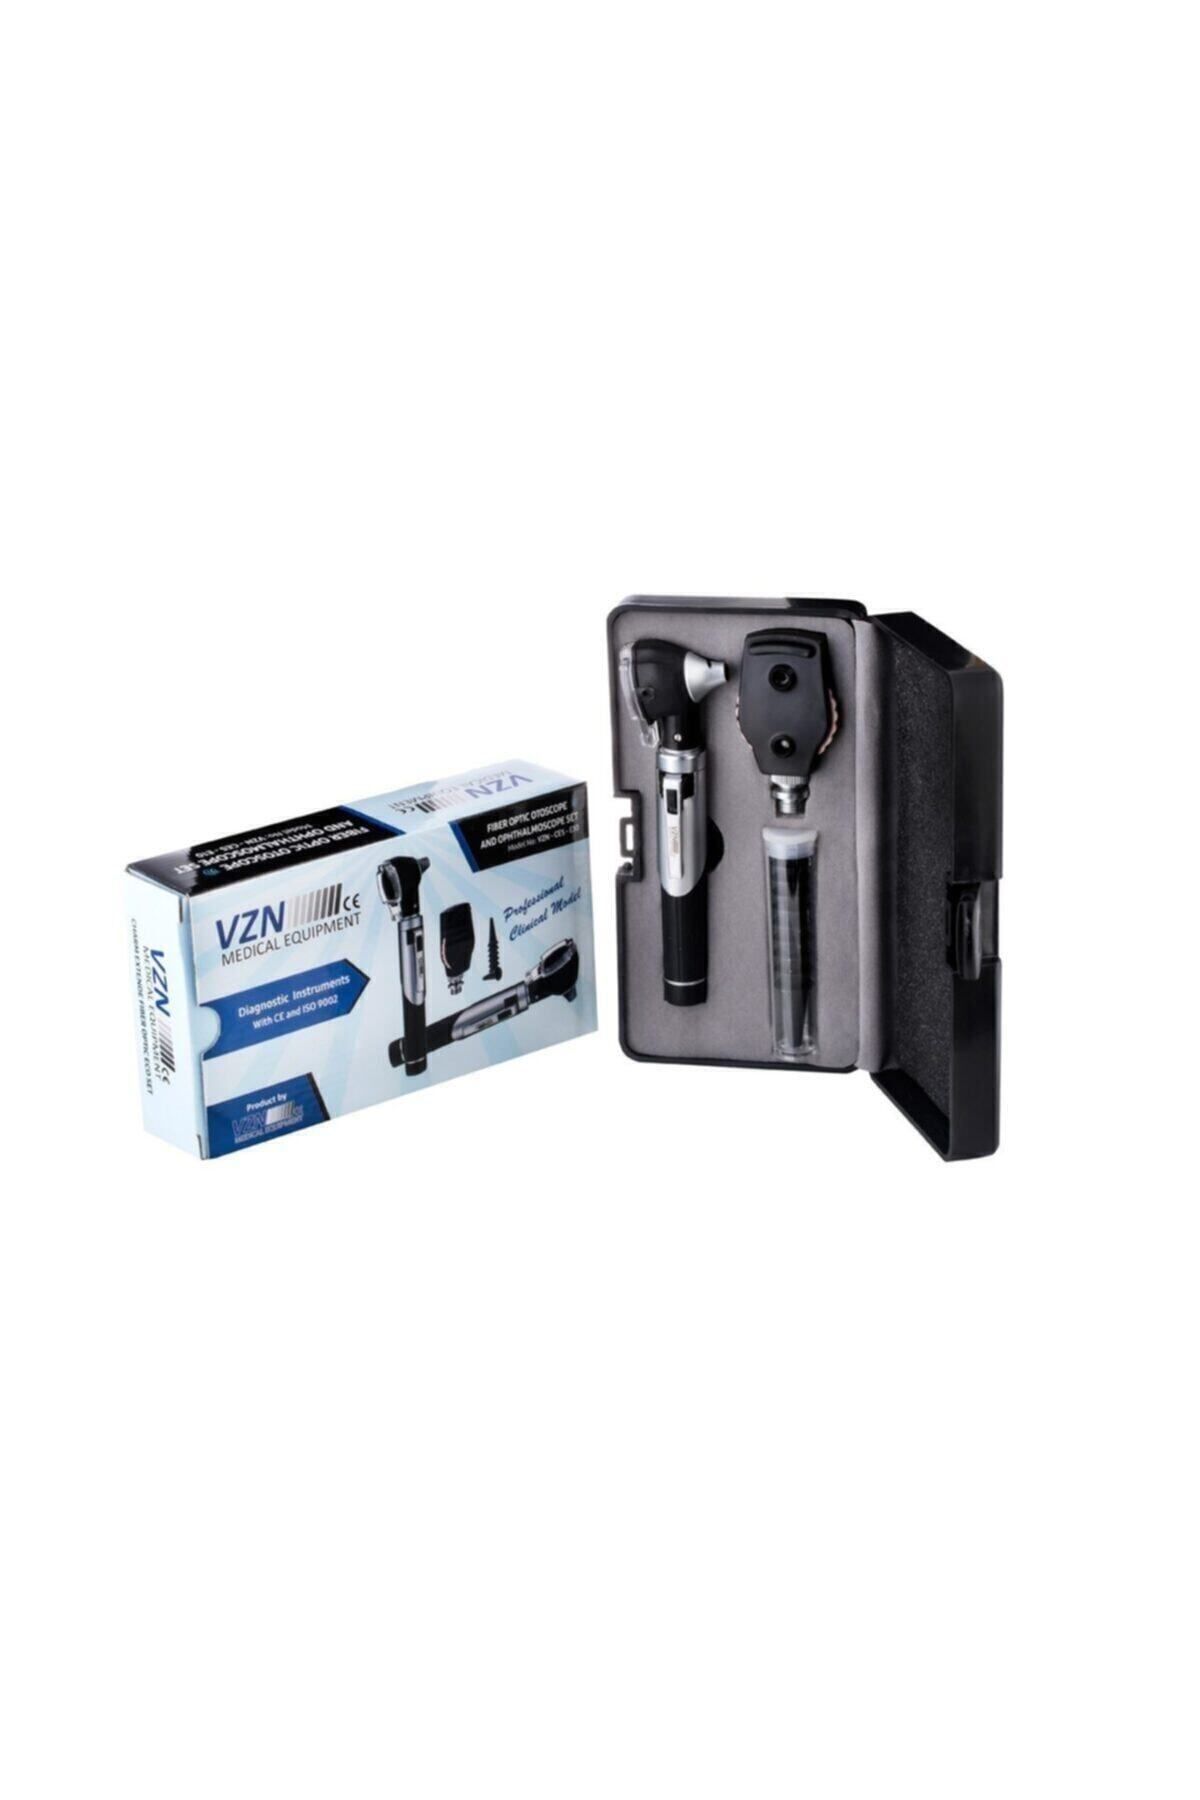 VZN -ces-e10 Fiber Optic Otoscope And Ophthalmoscope Set